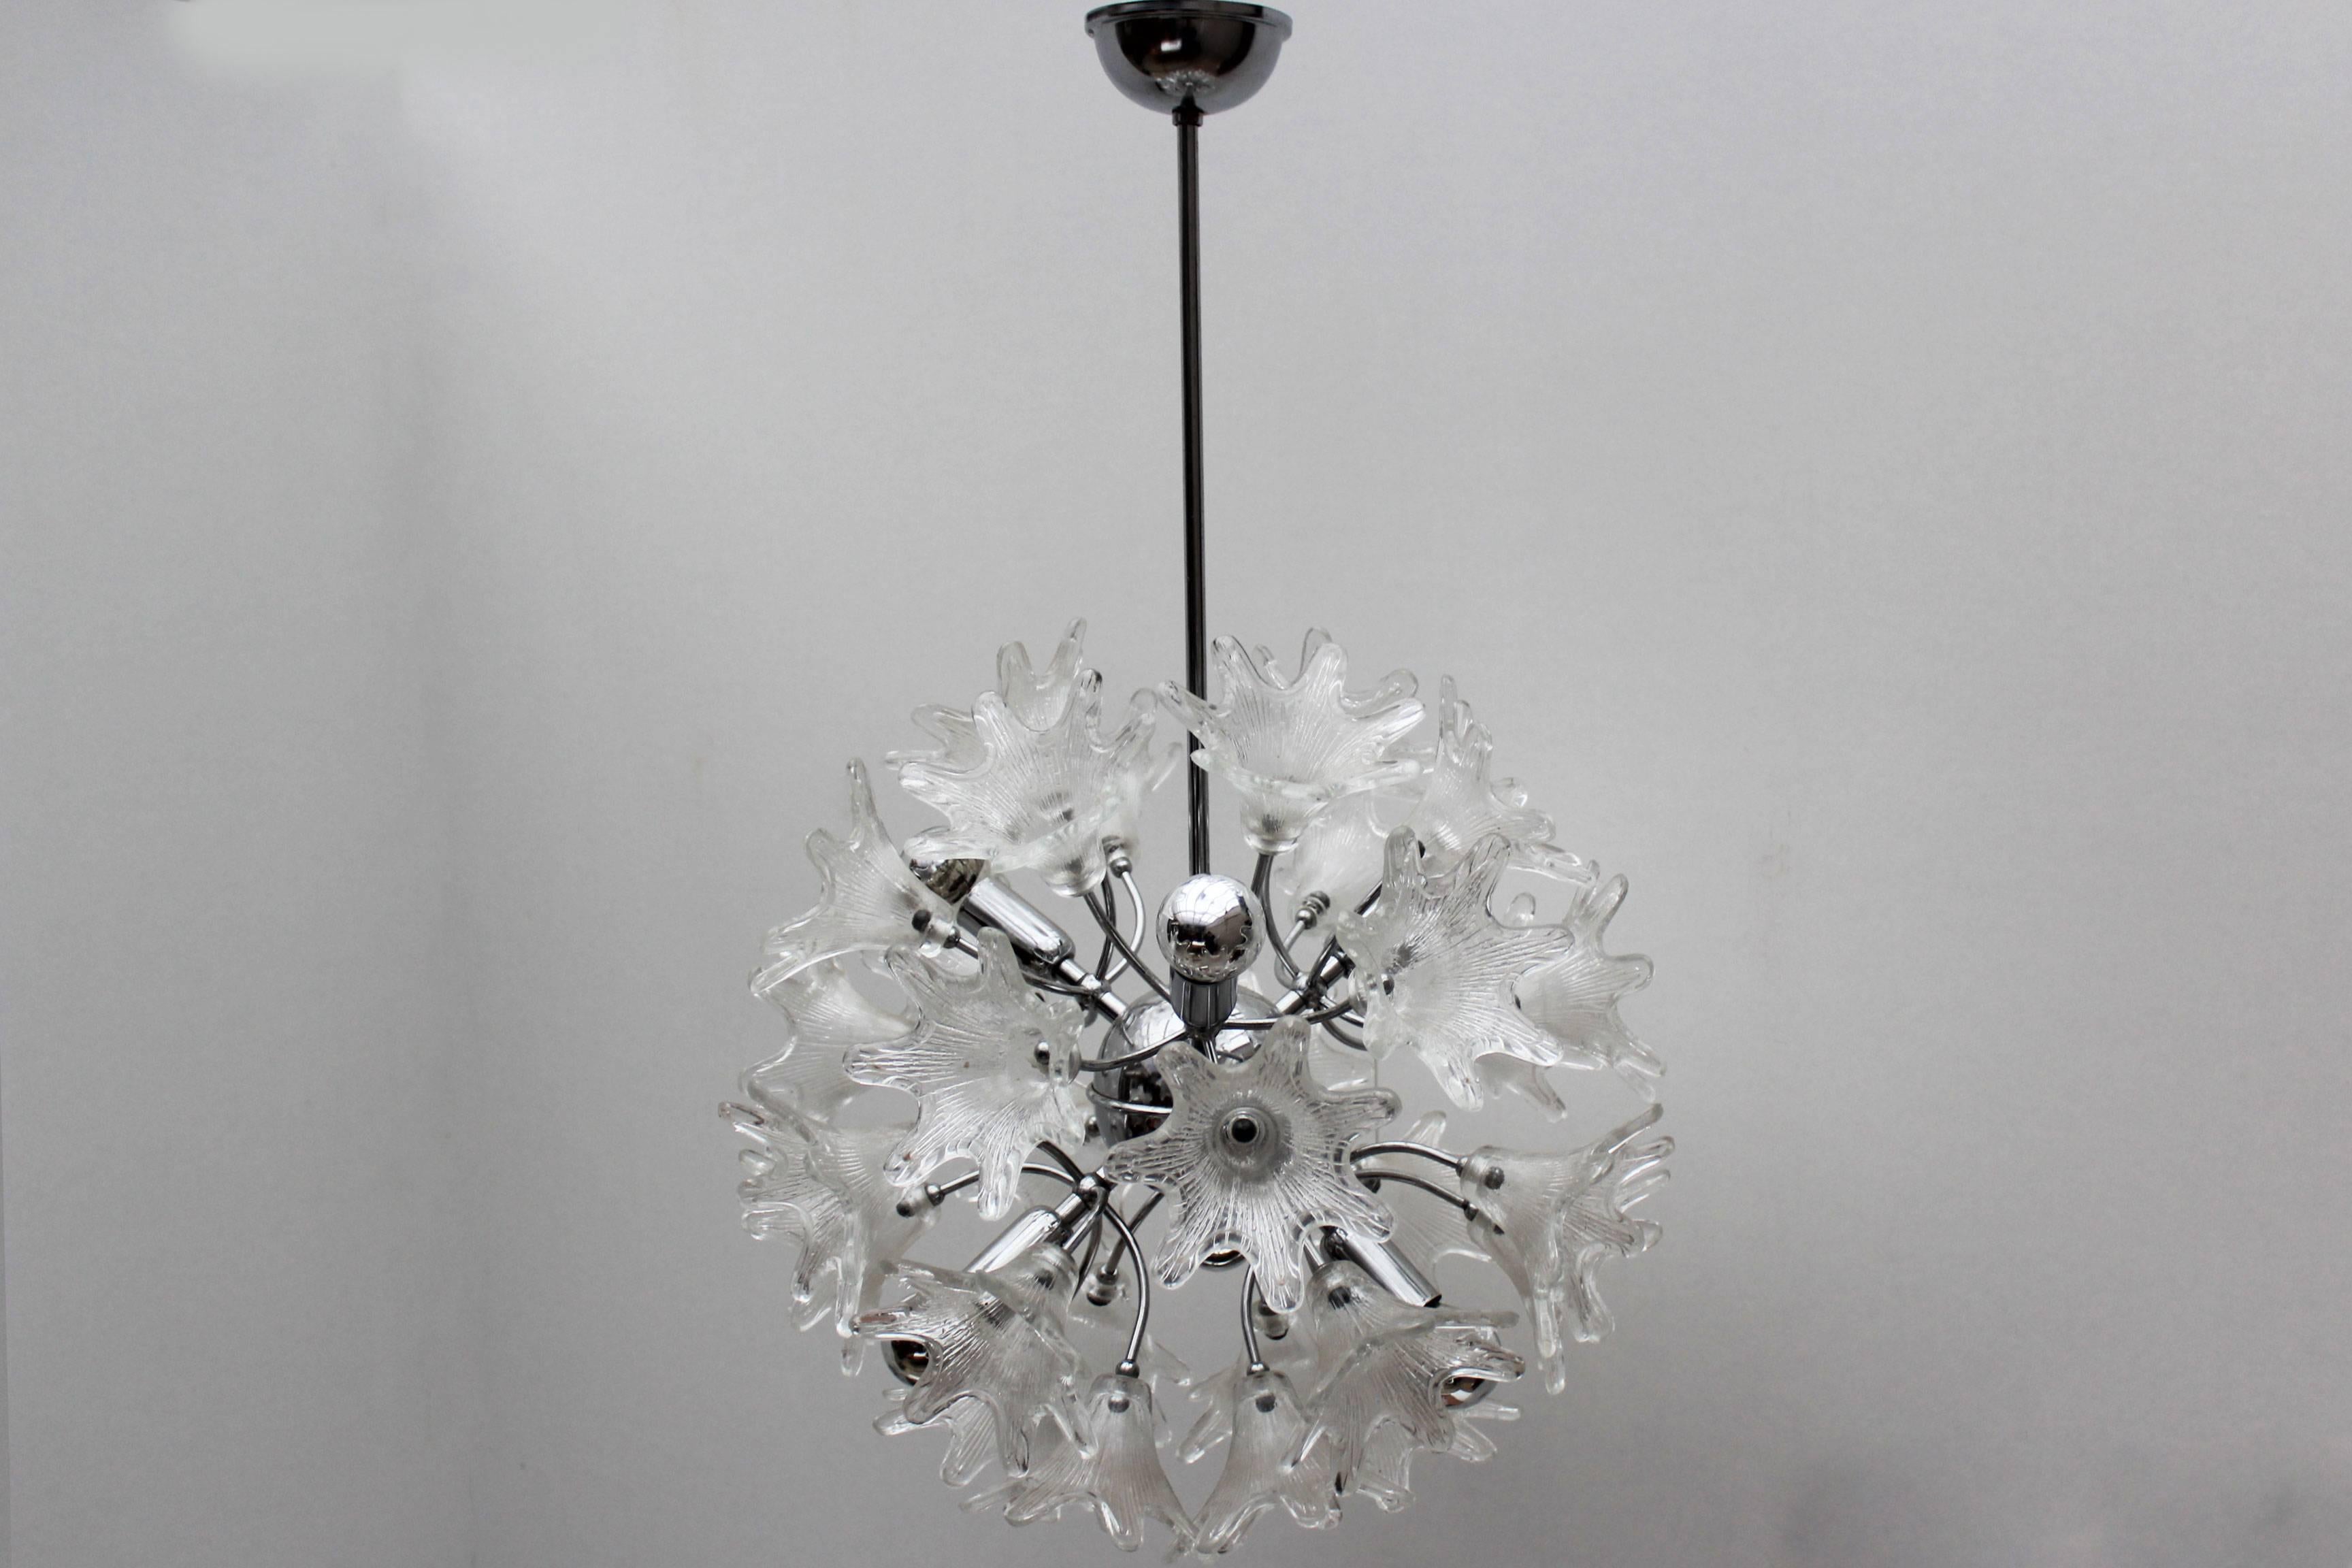 Midcentury Italian Murano Glass Sputnik Chandelier by Paolo Venini for VeArt For Sale 2